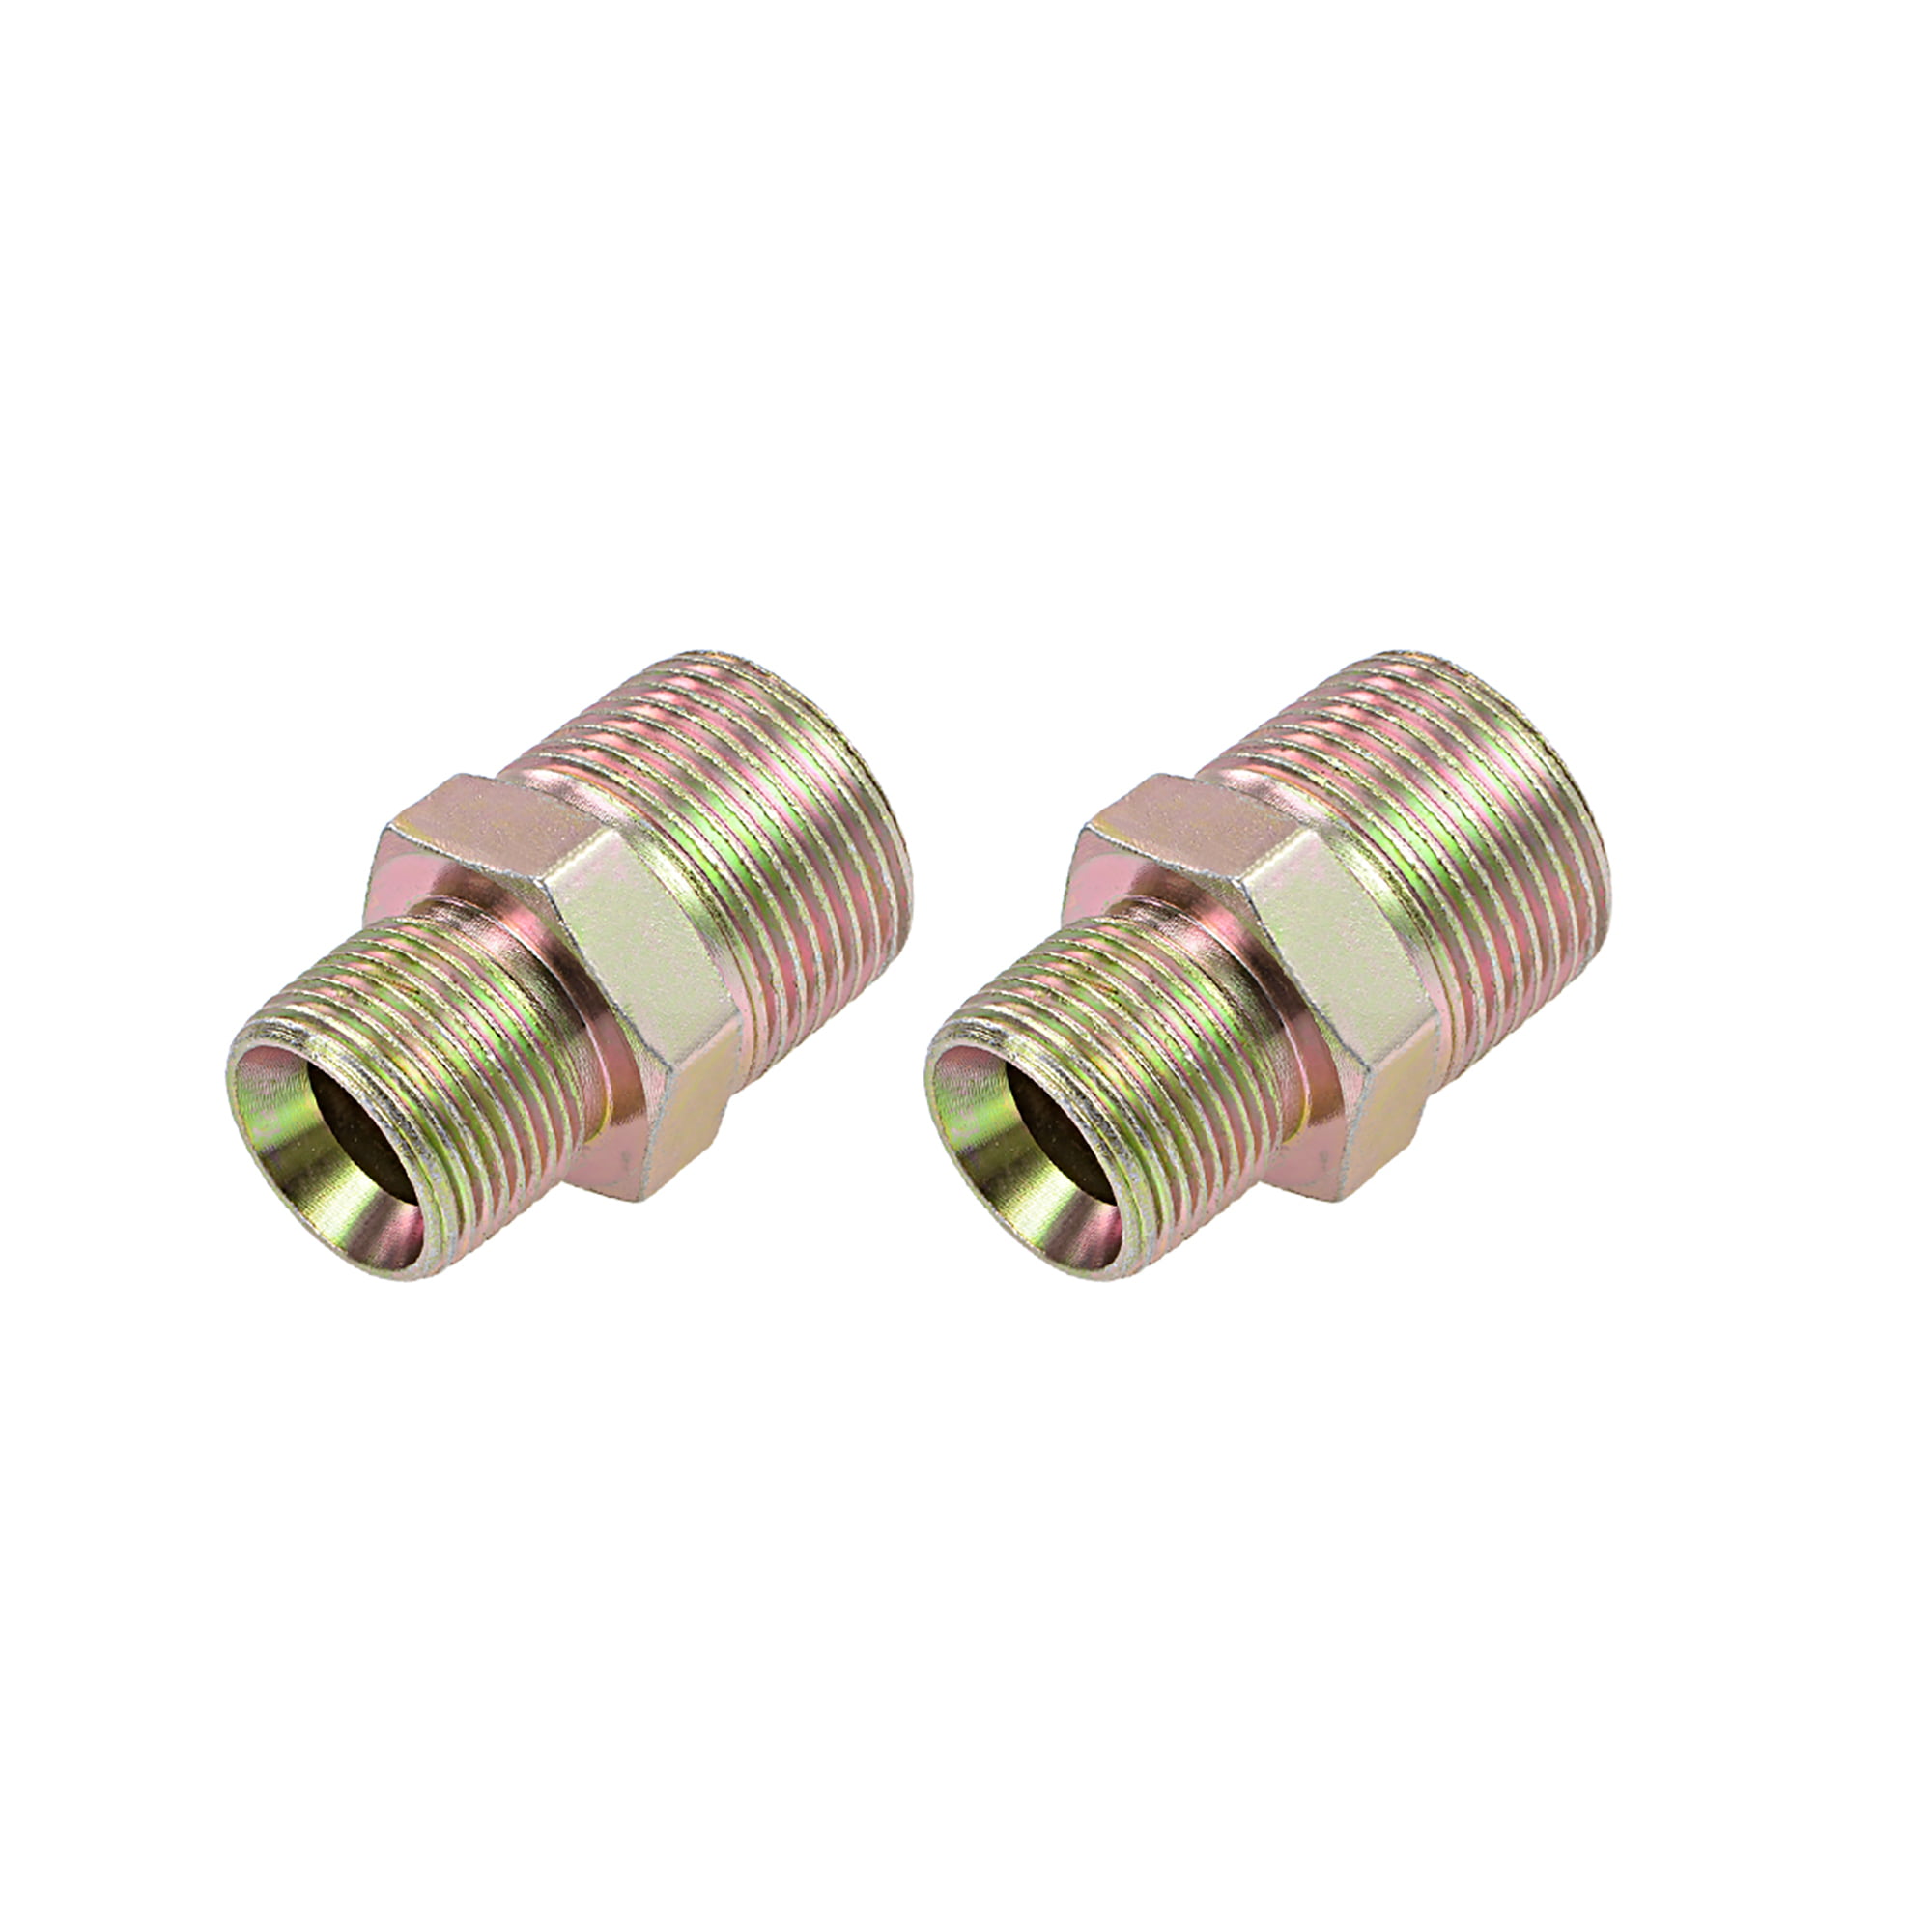 NEW Male NPT Thread Brass Hex Nipple Pipe Connecting Fitting Coupler Reducer